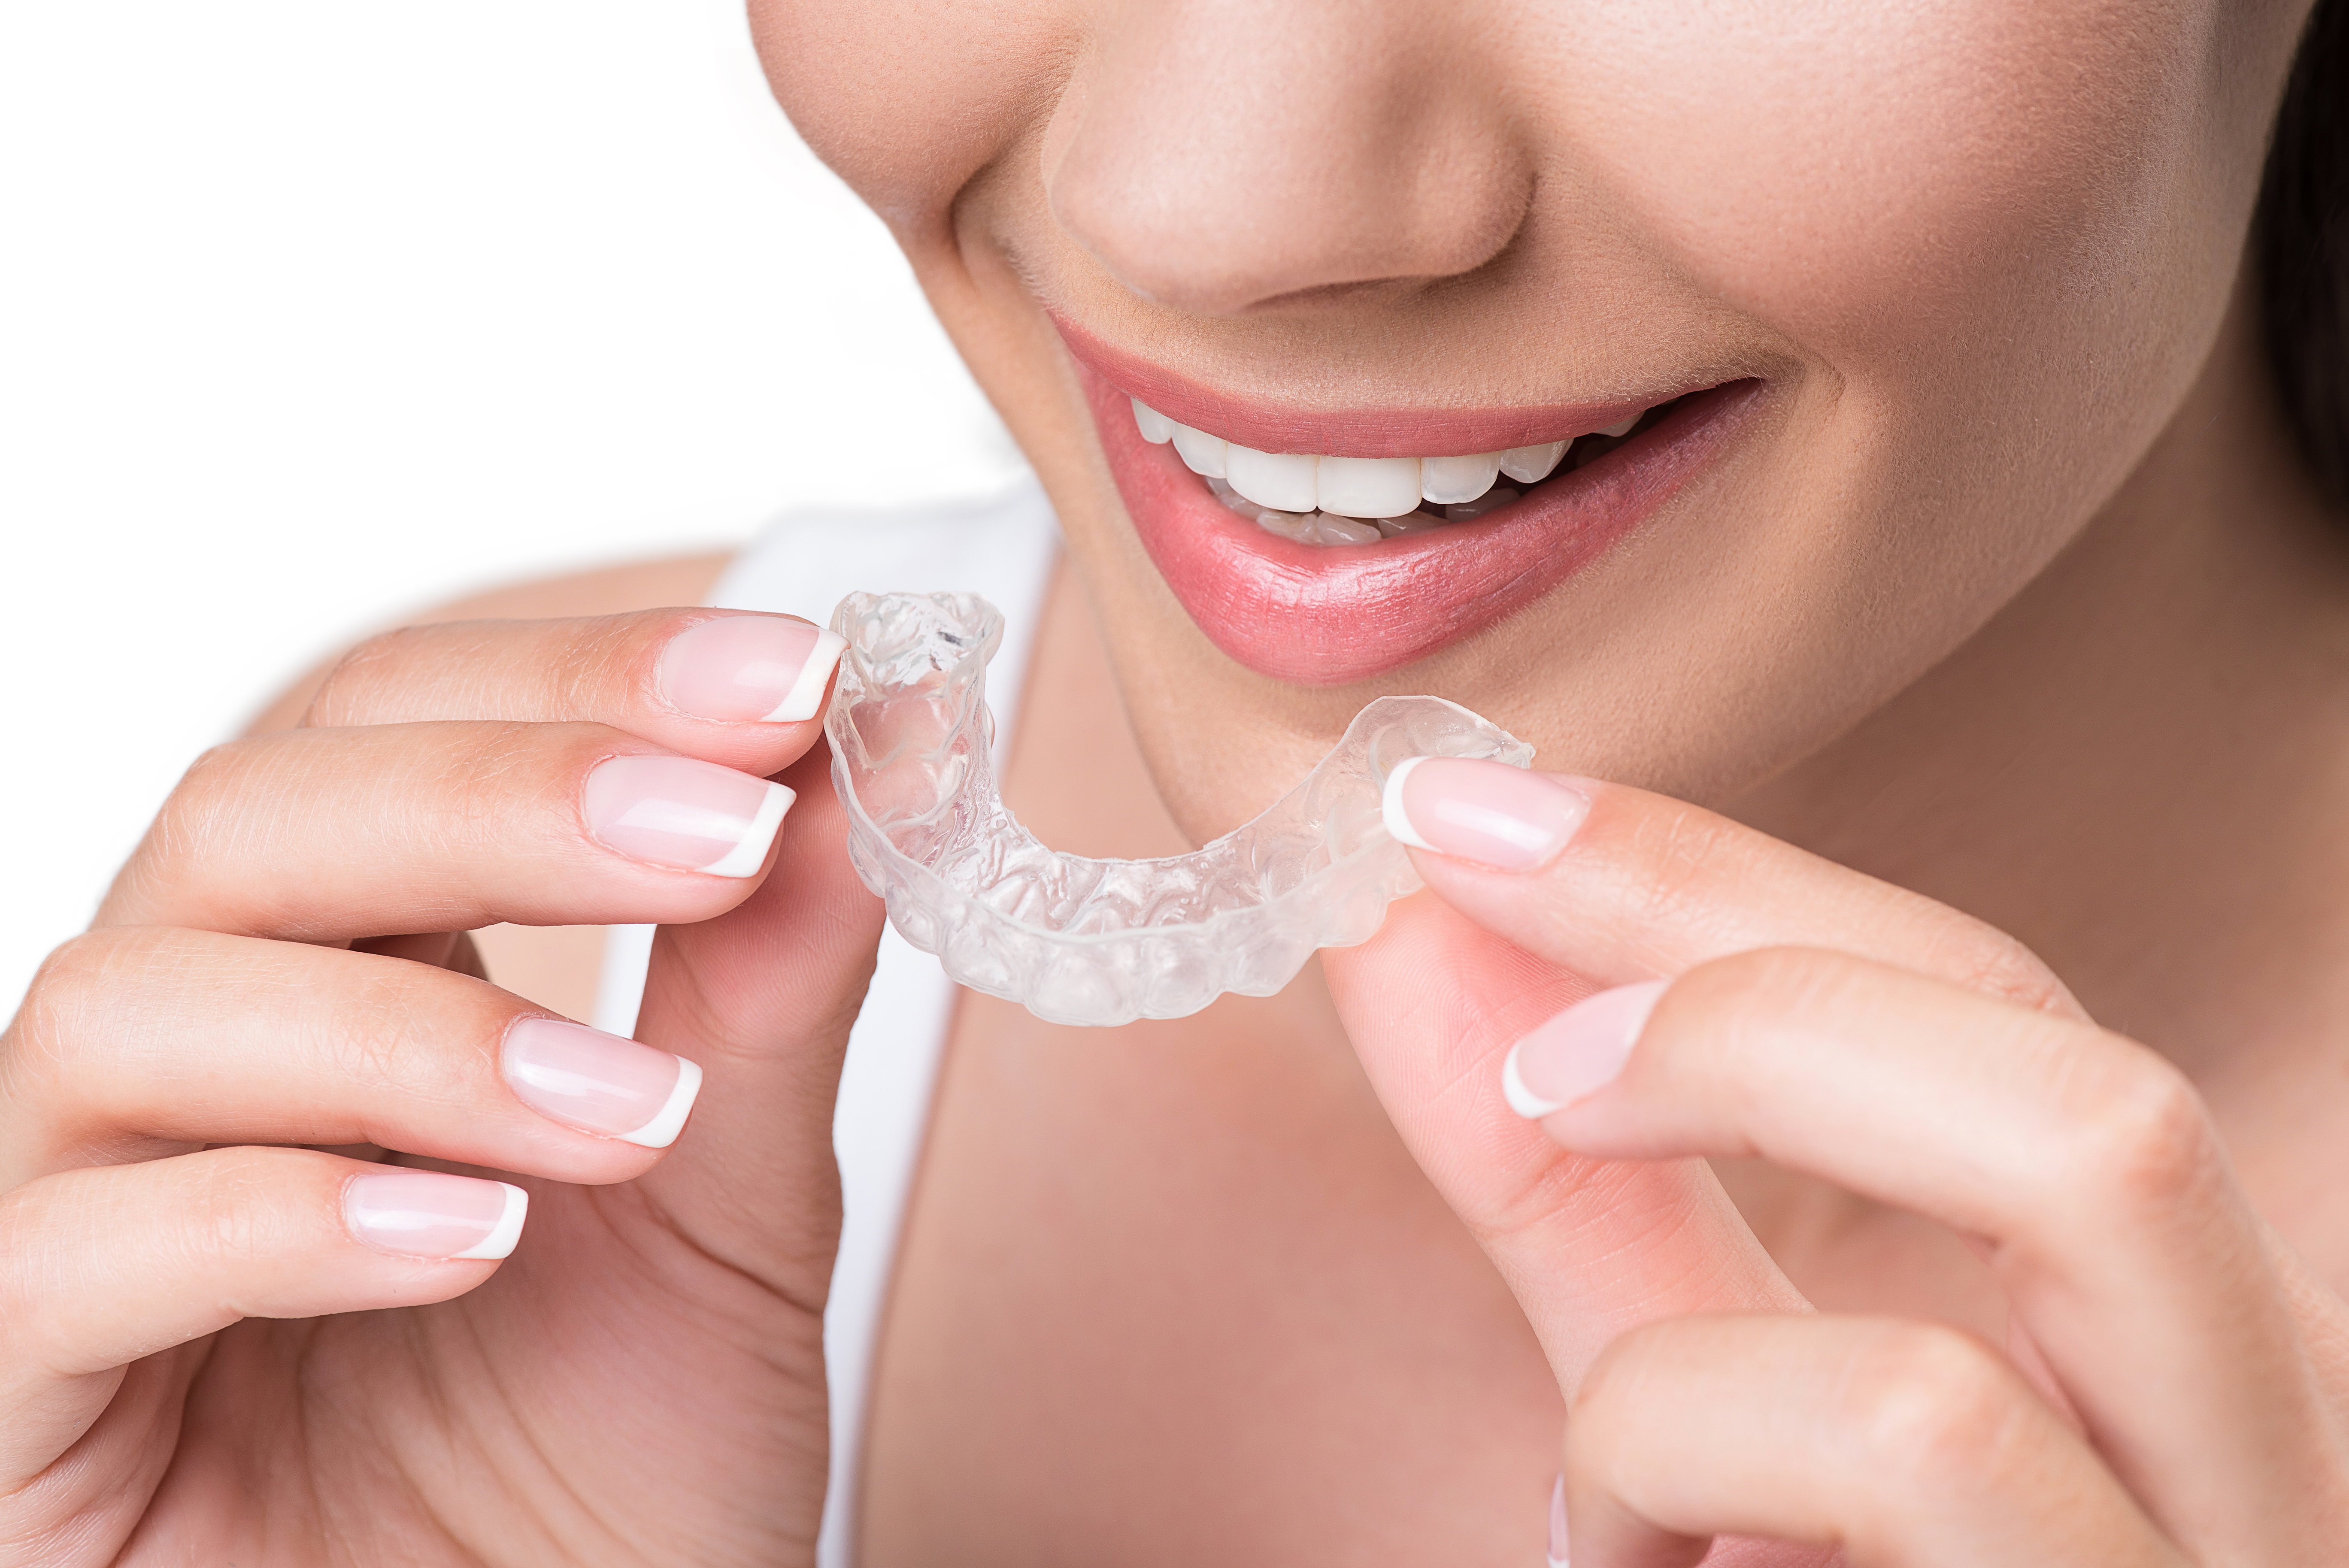 https://www.thedentalhaus.com/Account_Data/Account_1469/editor/original_clearaligners.jpg